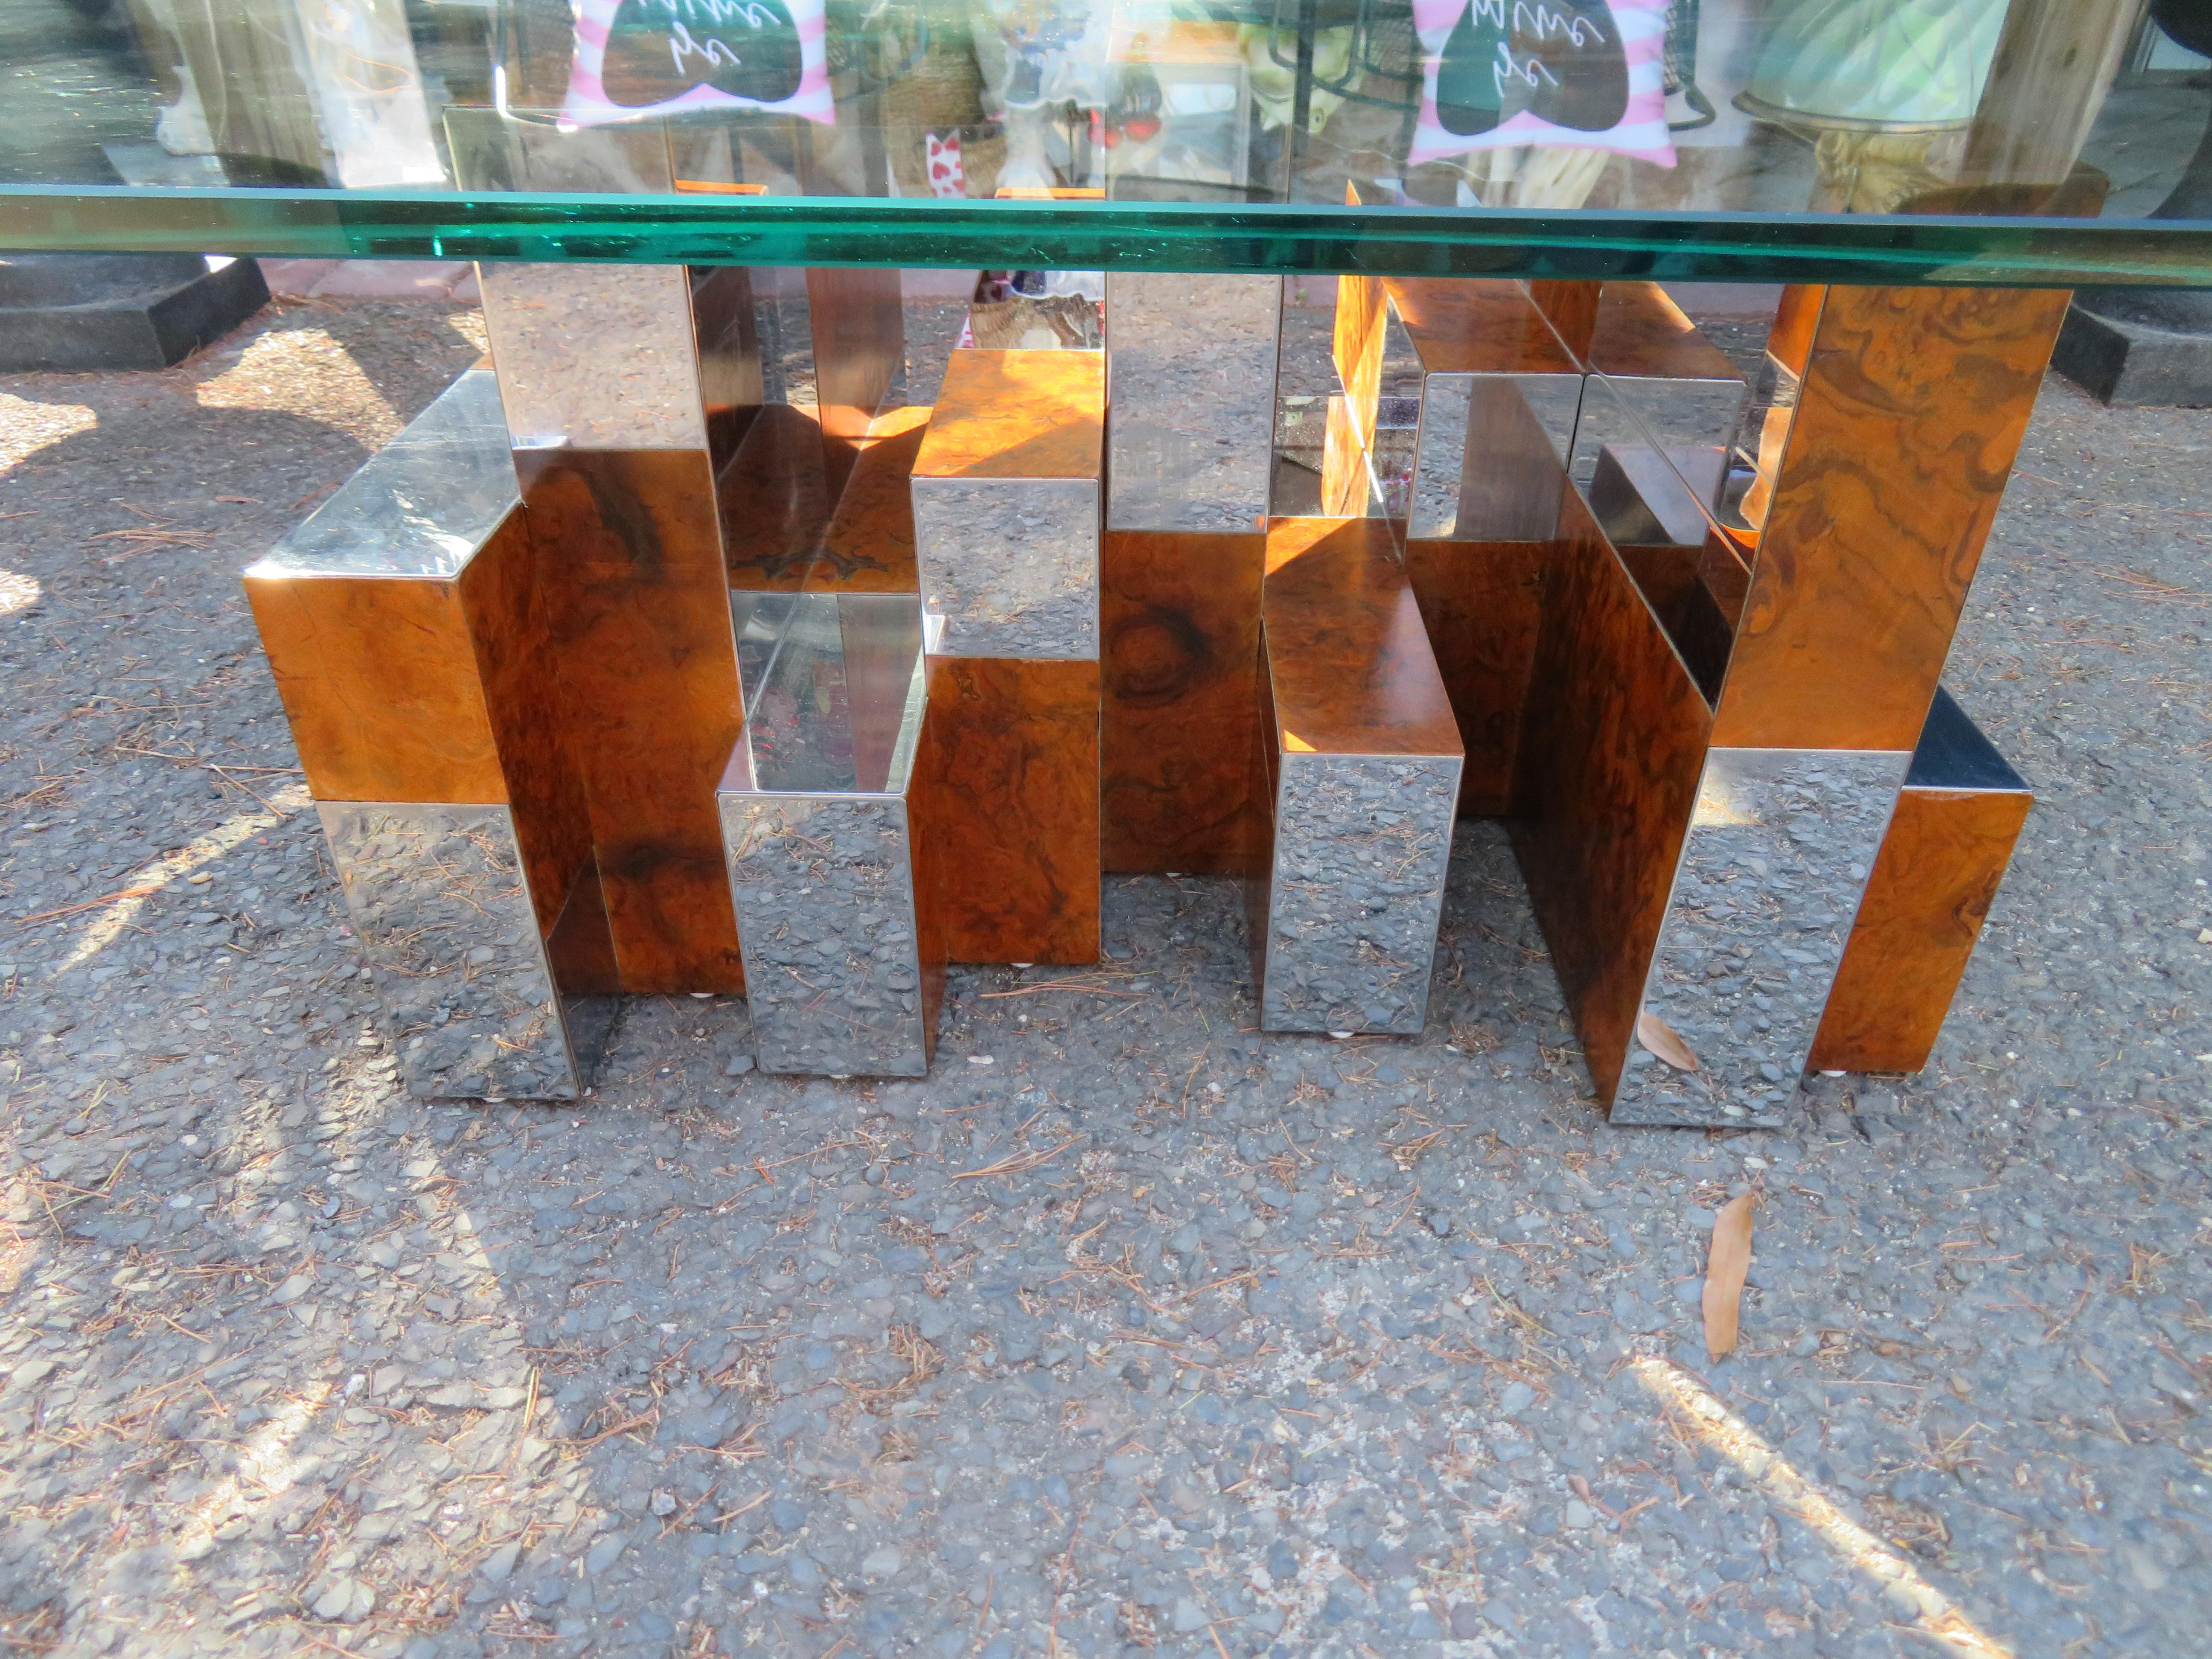 Stunning Cityscape coffee table with glass top by Paul Evans for Directional. Burl-Walnut alternates with chrome in this dynamic mid-70s design by Paul Evans. Very nice original condition with only minor signs of age. 
Signed Paul Evans.
Base: